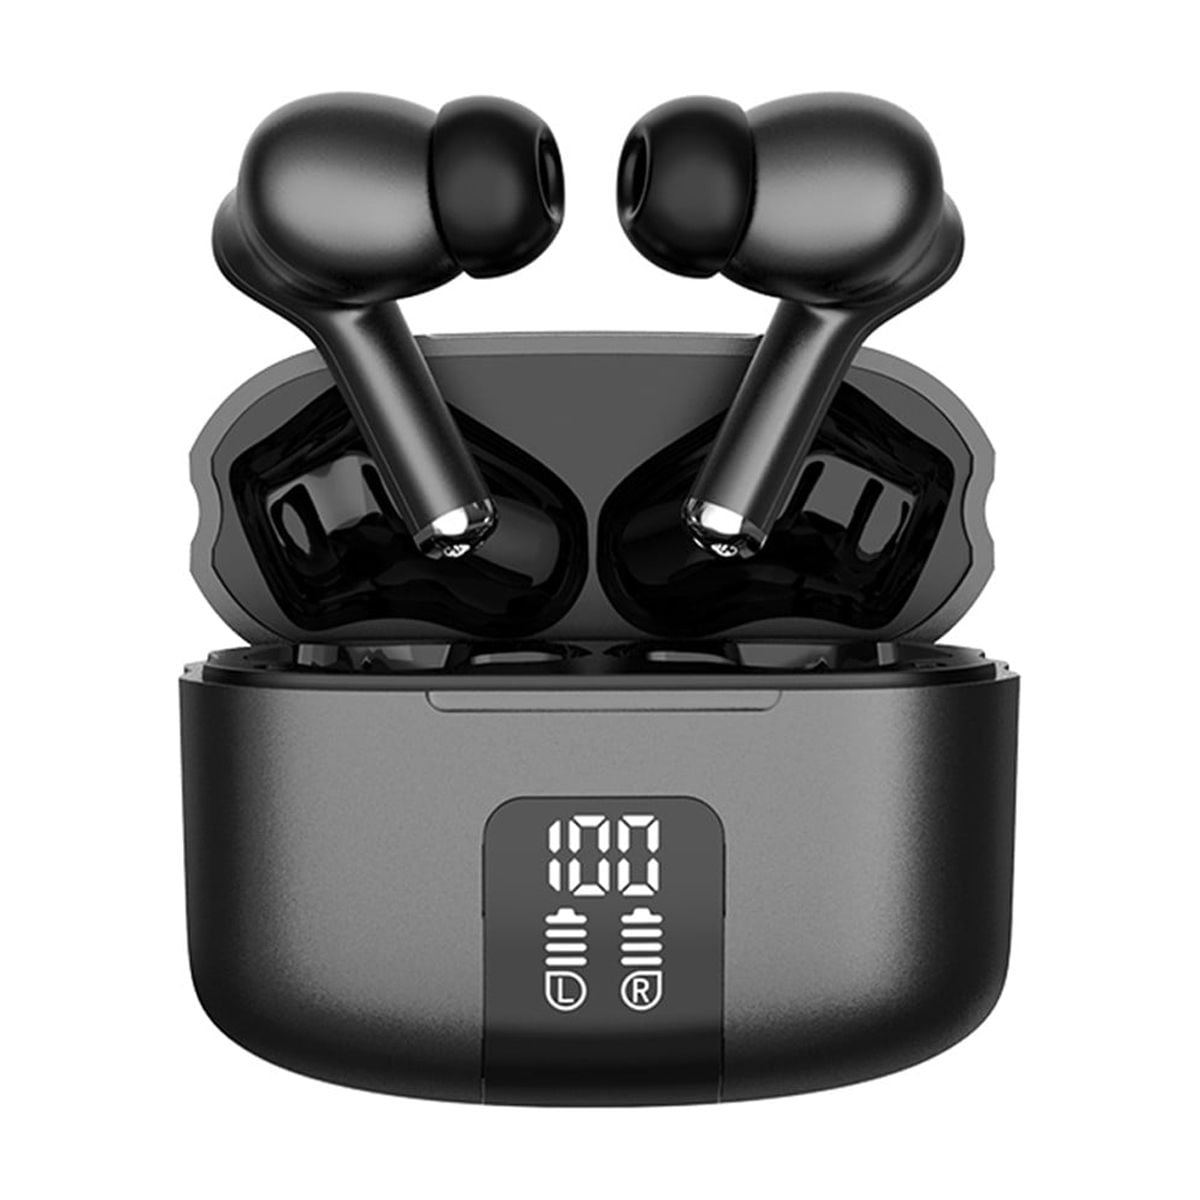 UrbanX Q350 Wireless Earbuds in Ear Bluetooth Headphones For